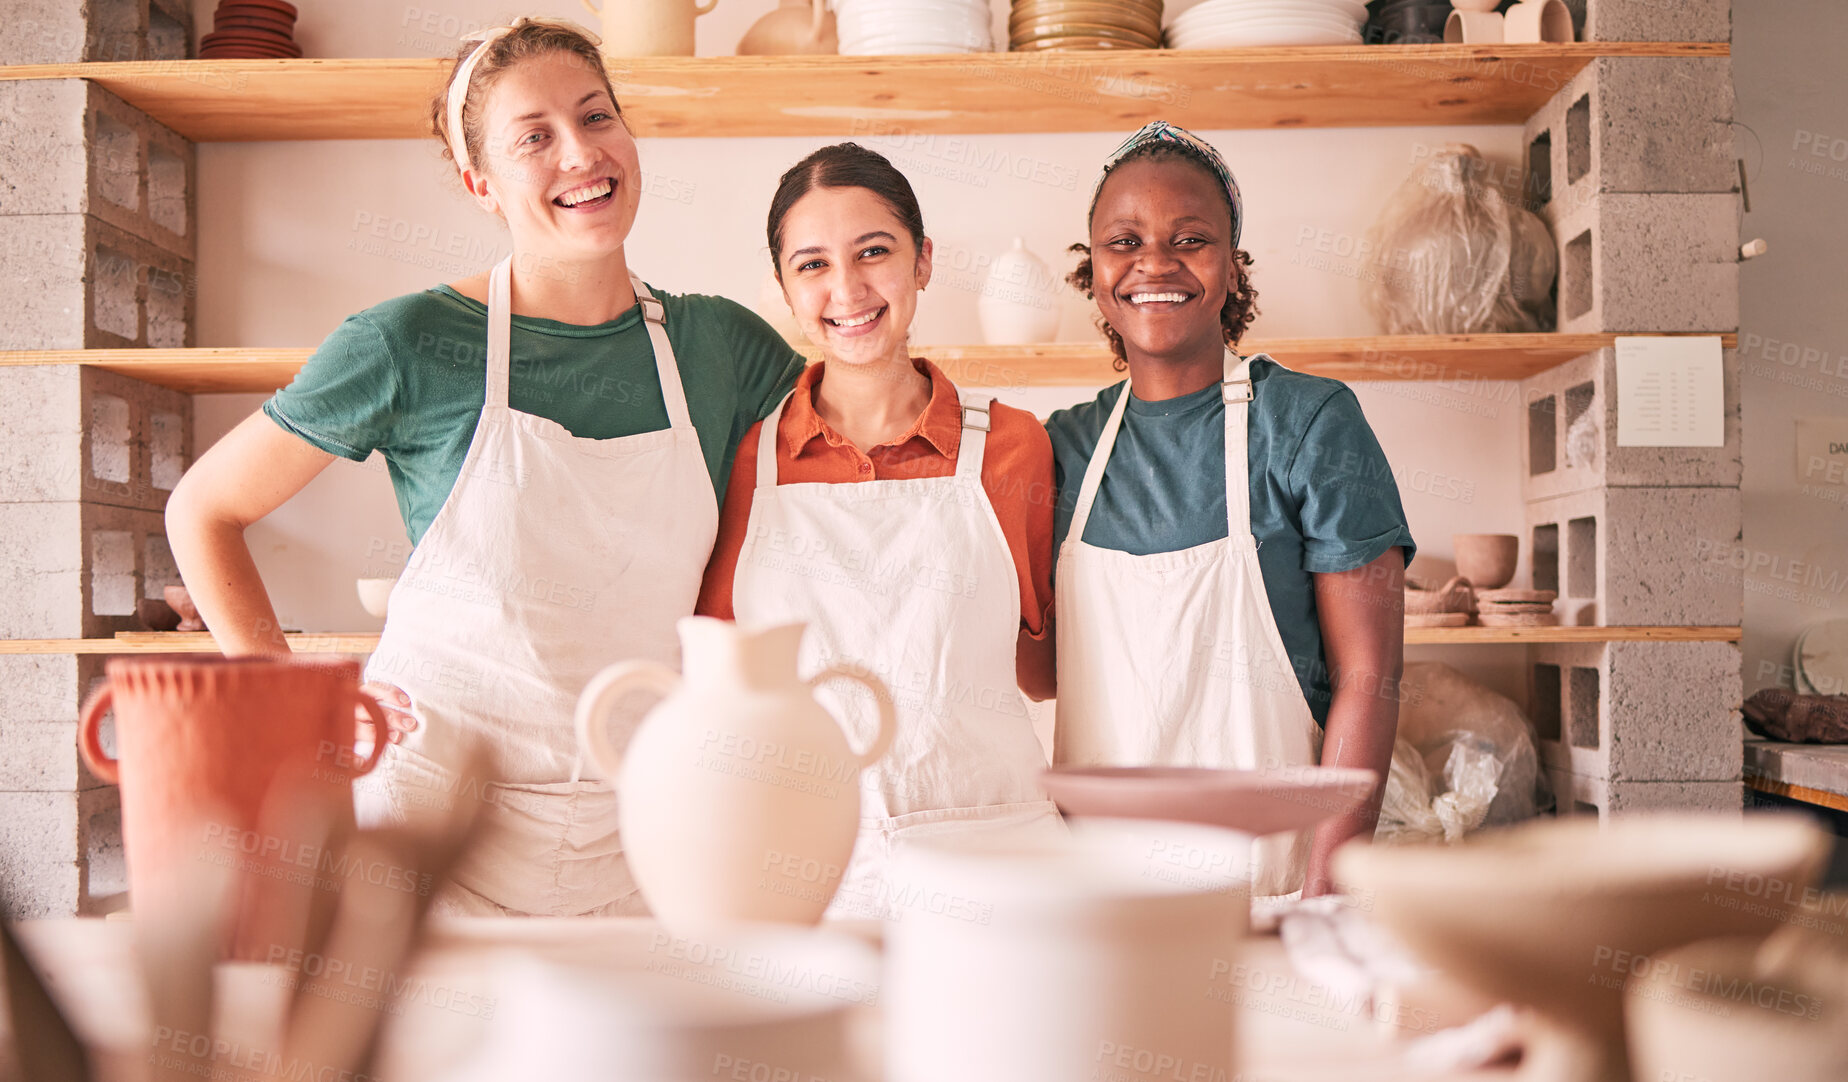 Buy stock photo Pottery class portrait, hug and women design sculpture mold, ceramic manufacturing or art product. Diversity, retail store and startup small business owner, artist or happy people in workshop studio